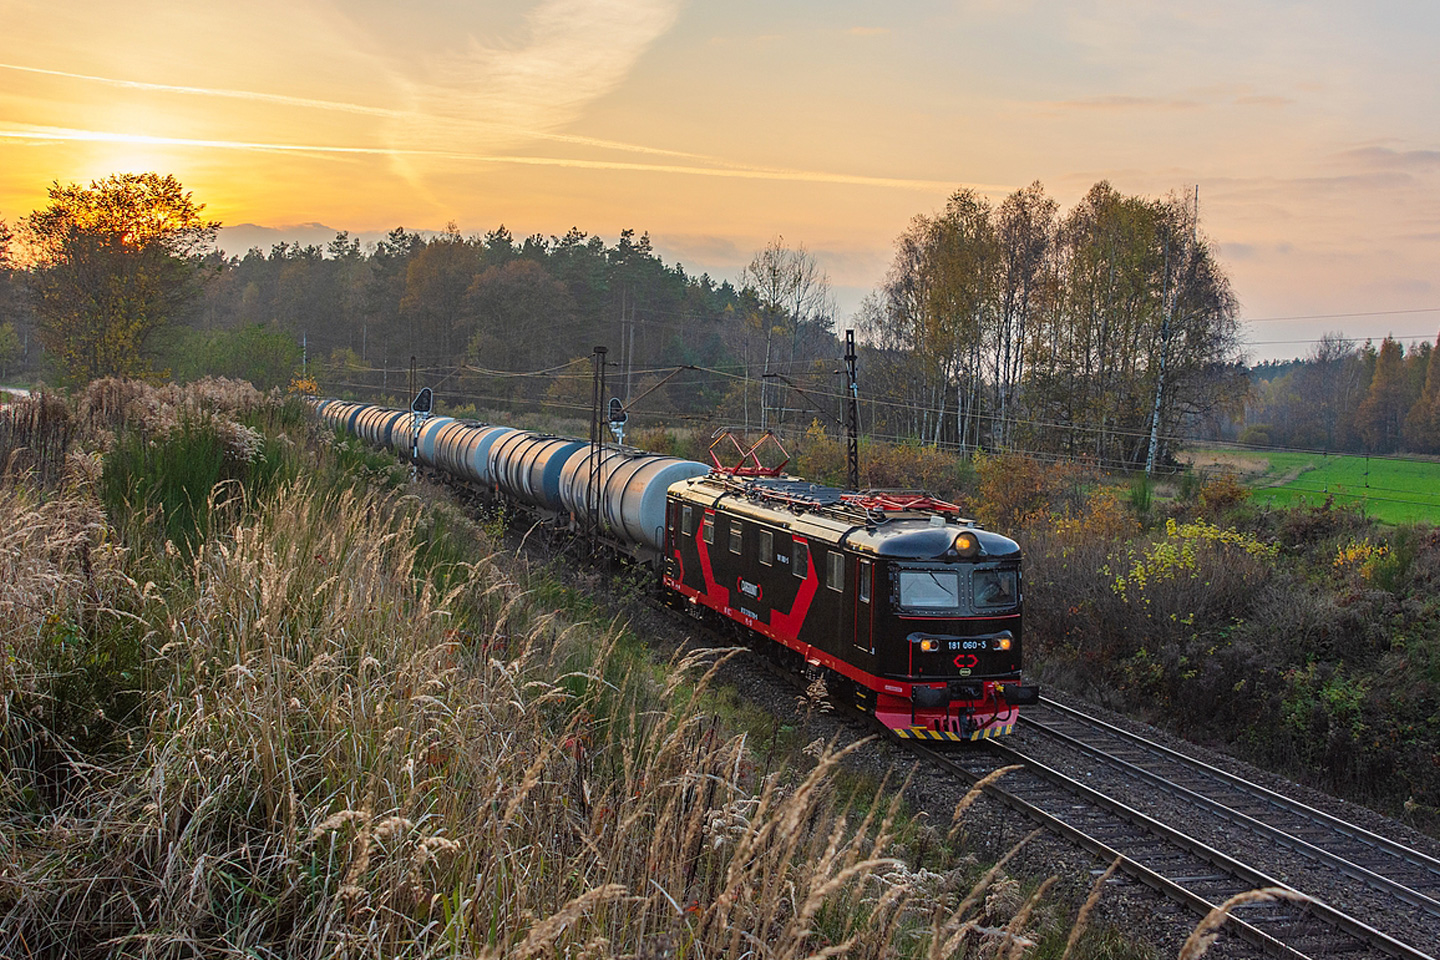 image of train on tracks in the countryside